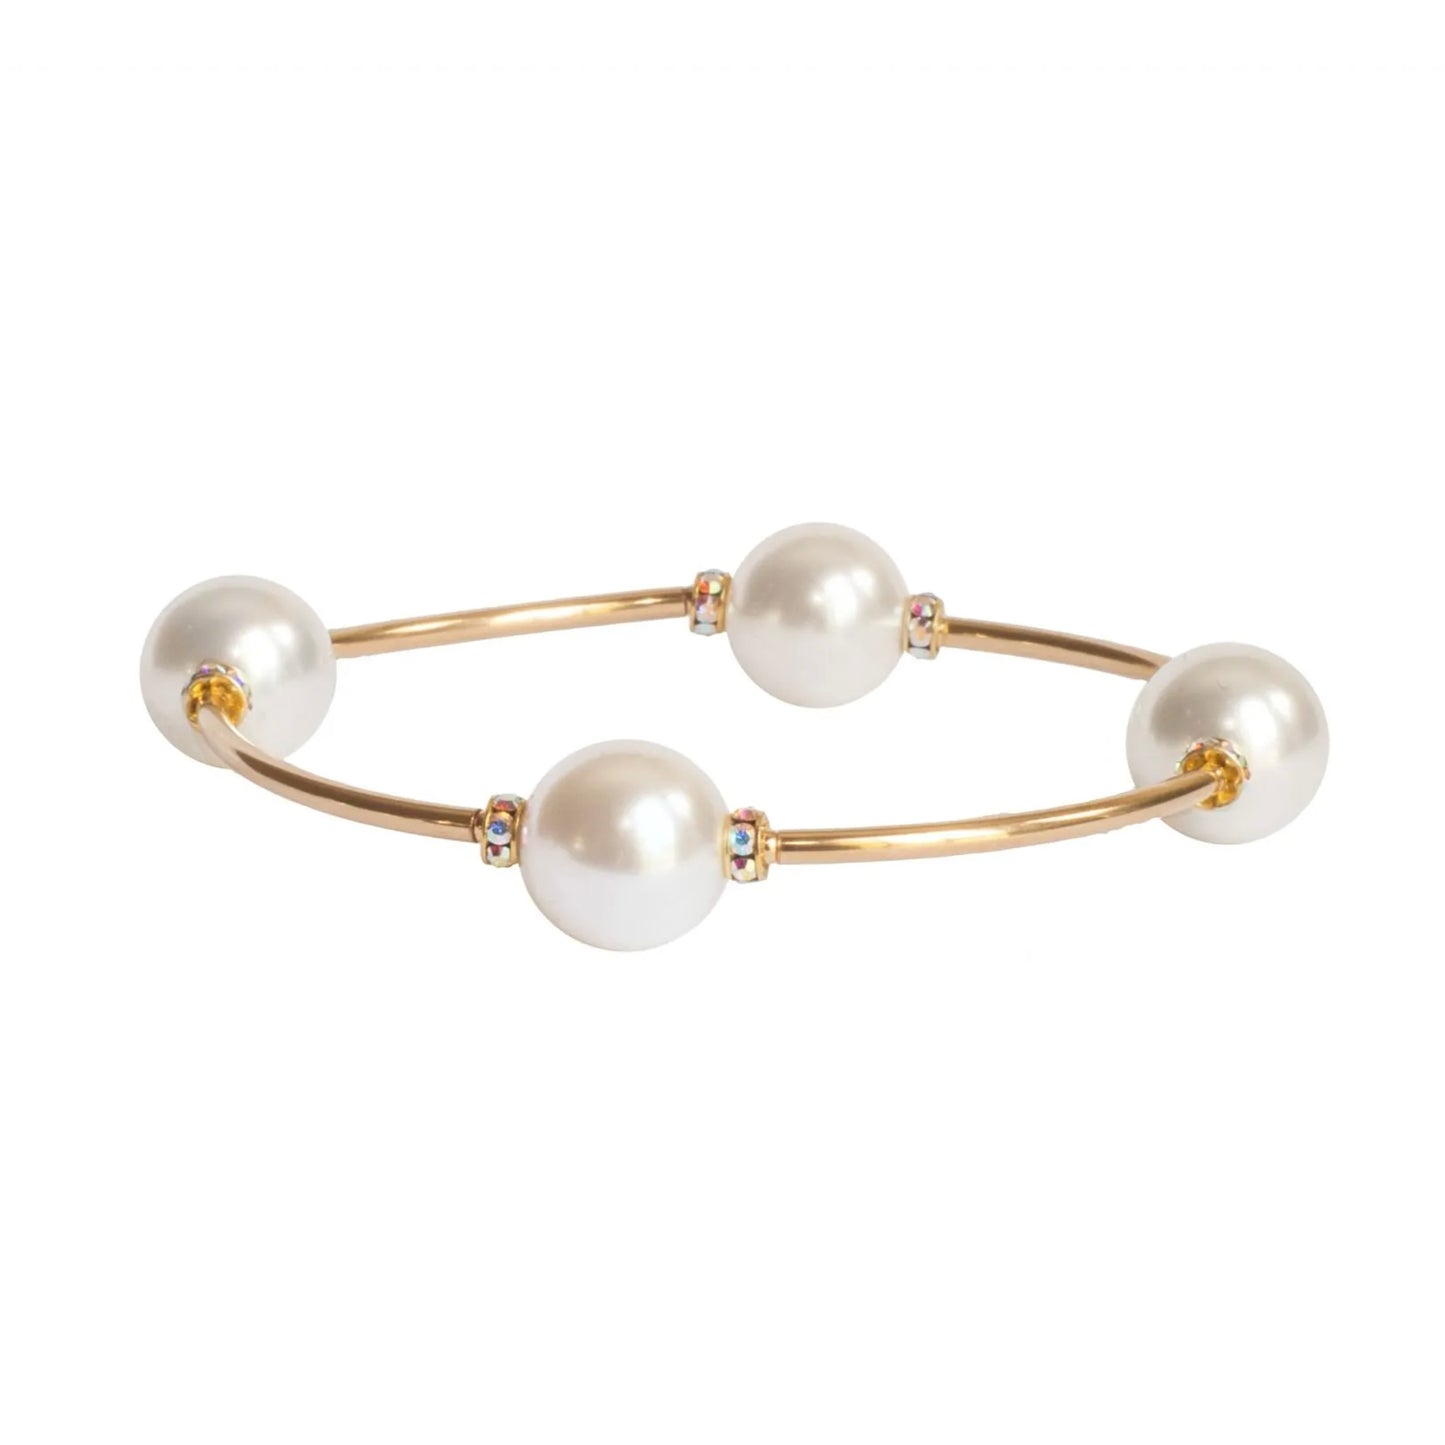 Made As Intended 12mm Crystal White Pearl Blessing Bracelet - Gold Links available at The Good Life Boutique